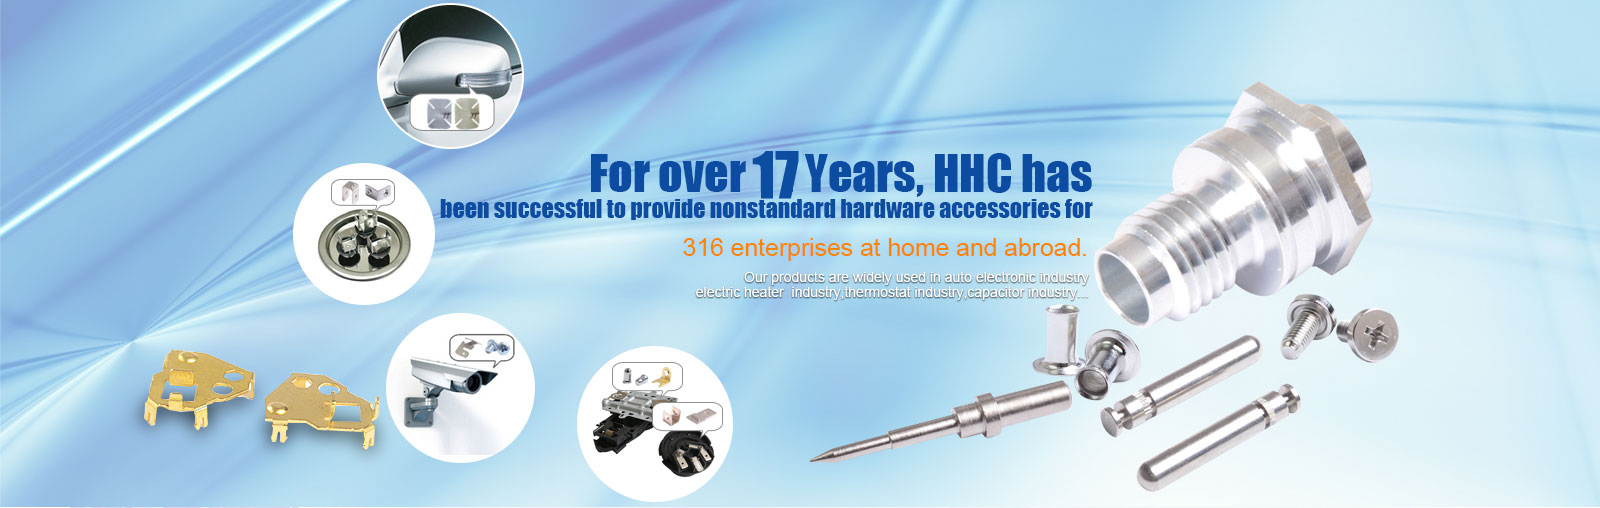 For over 17 years，HHC has been successful for 316 enterprises at home and abroad to provide non-standard hardware accessories.